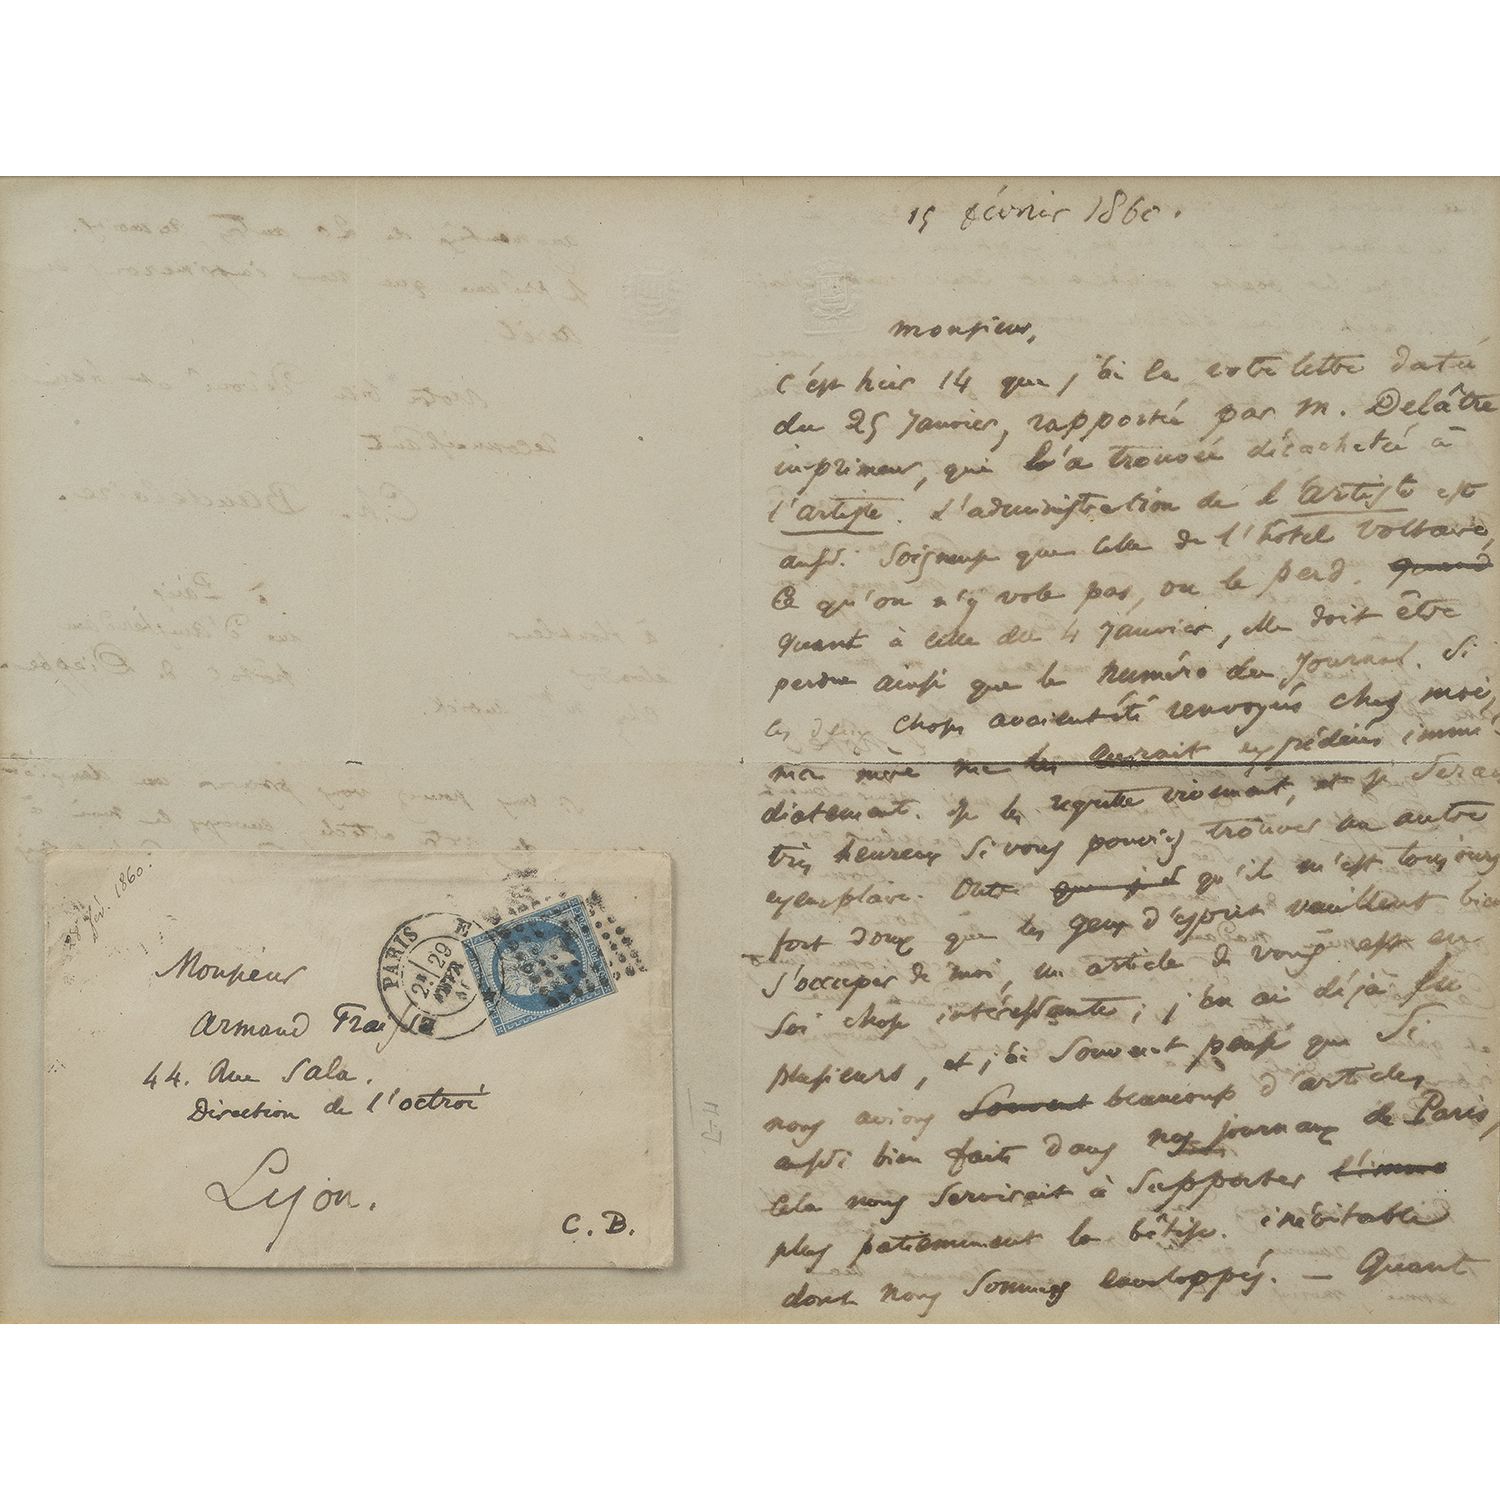 Null [BAUDELAIRE (CHARLES) (1821-1867)]
Autograph letter signed by Charles Baude&hellip;